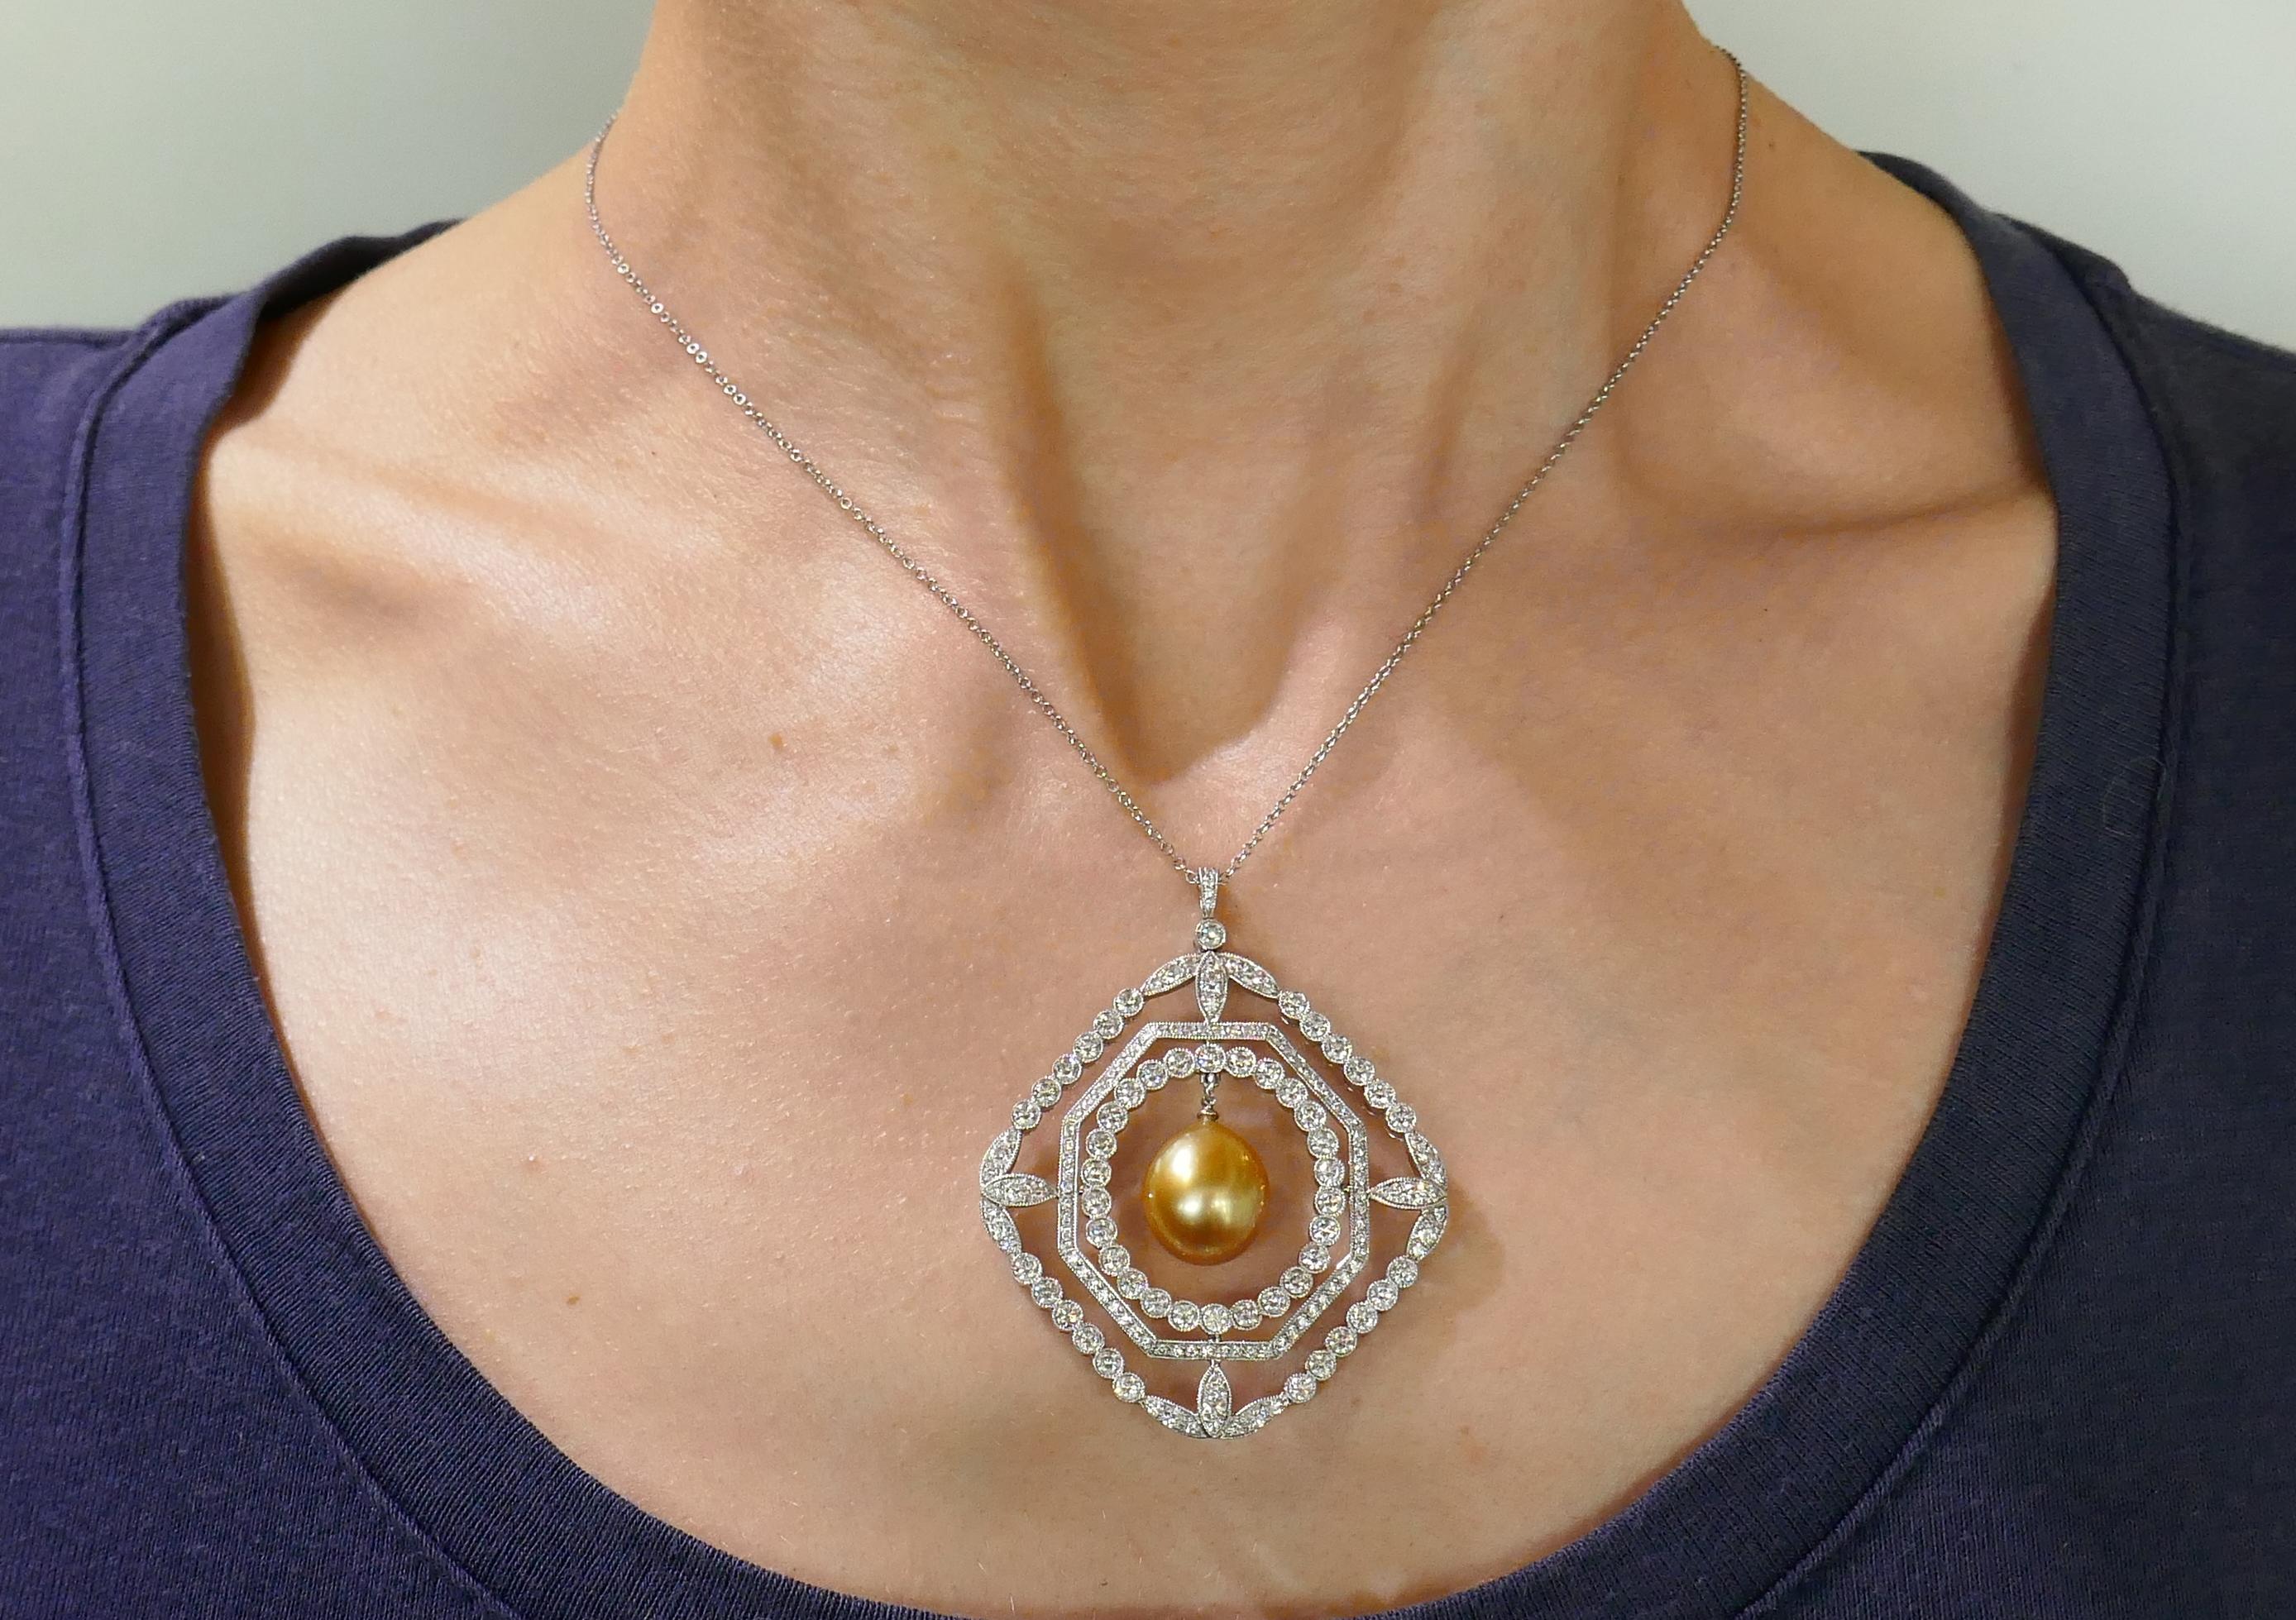 Fabulous pendant necklace created by Tiffany & Co. in the 1990s. Delicate, feminine and wearable, The necklace is a great addition to your jewelry collection. 
The pendant features a gorgeous tear-drop shape South Sea golden pearl intricately framed